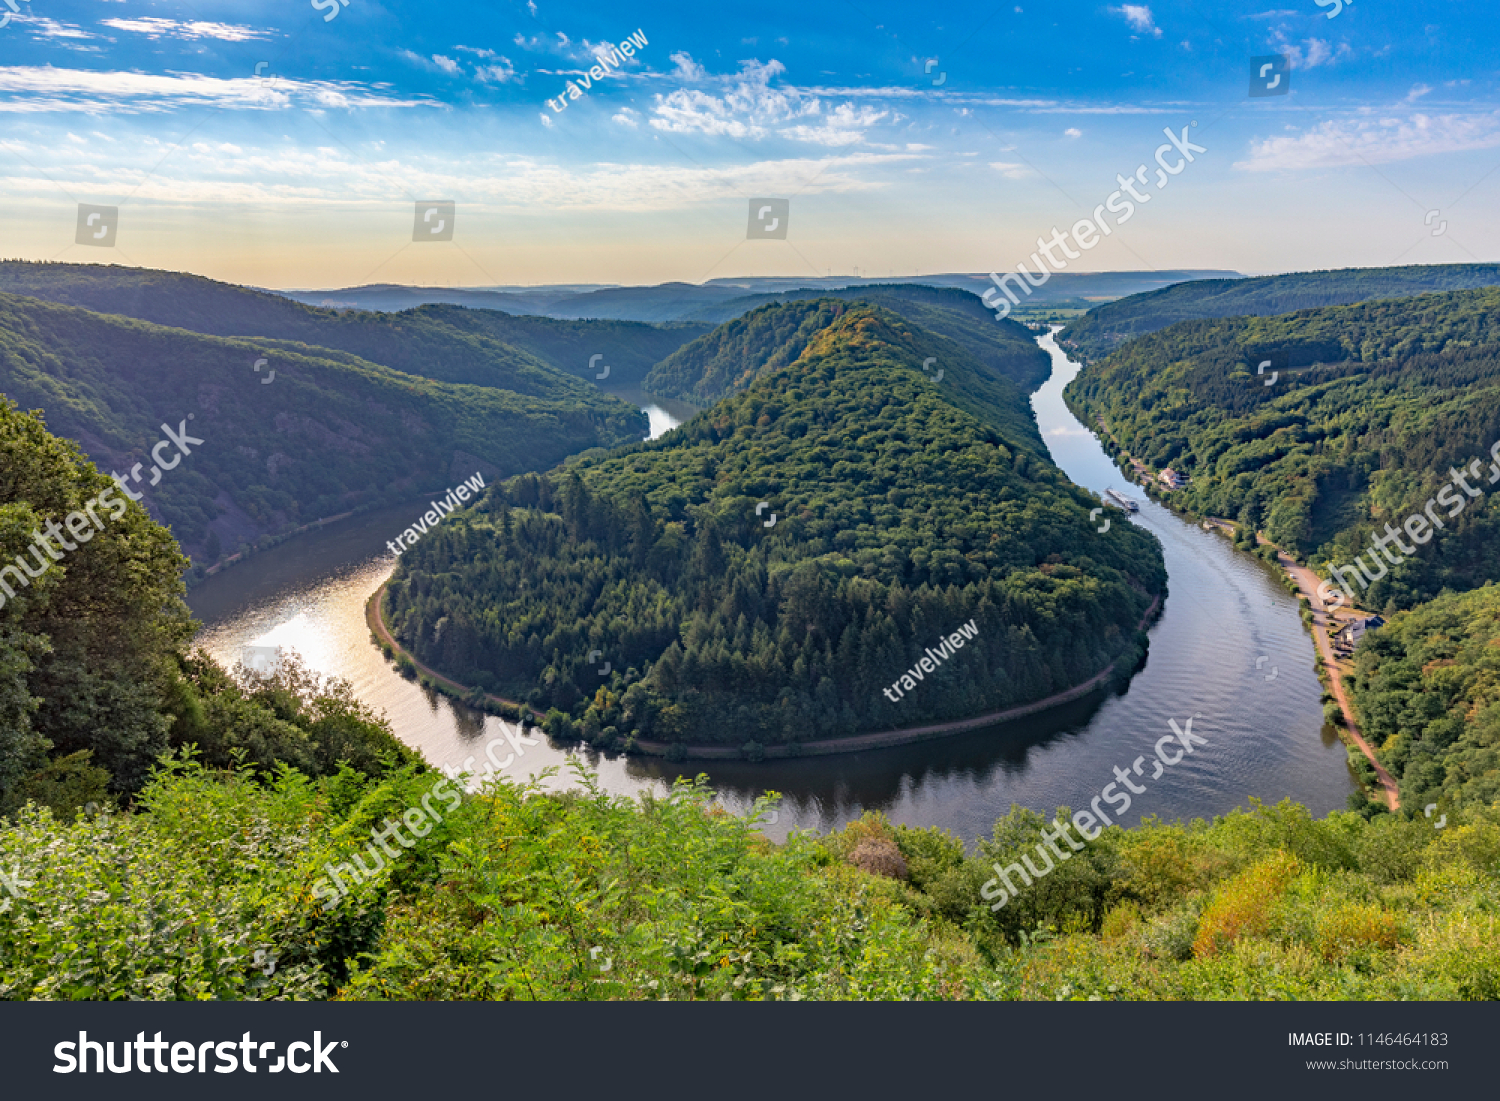 Unique landscape and landmark of the Saarland with a view to Saar river bend in Germany #1146464183